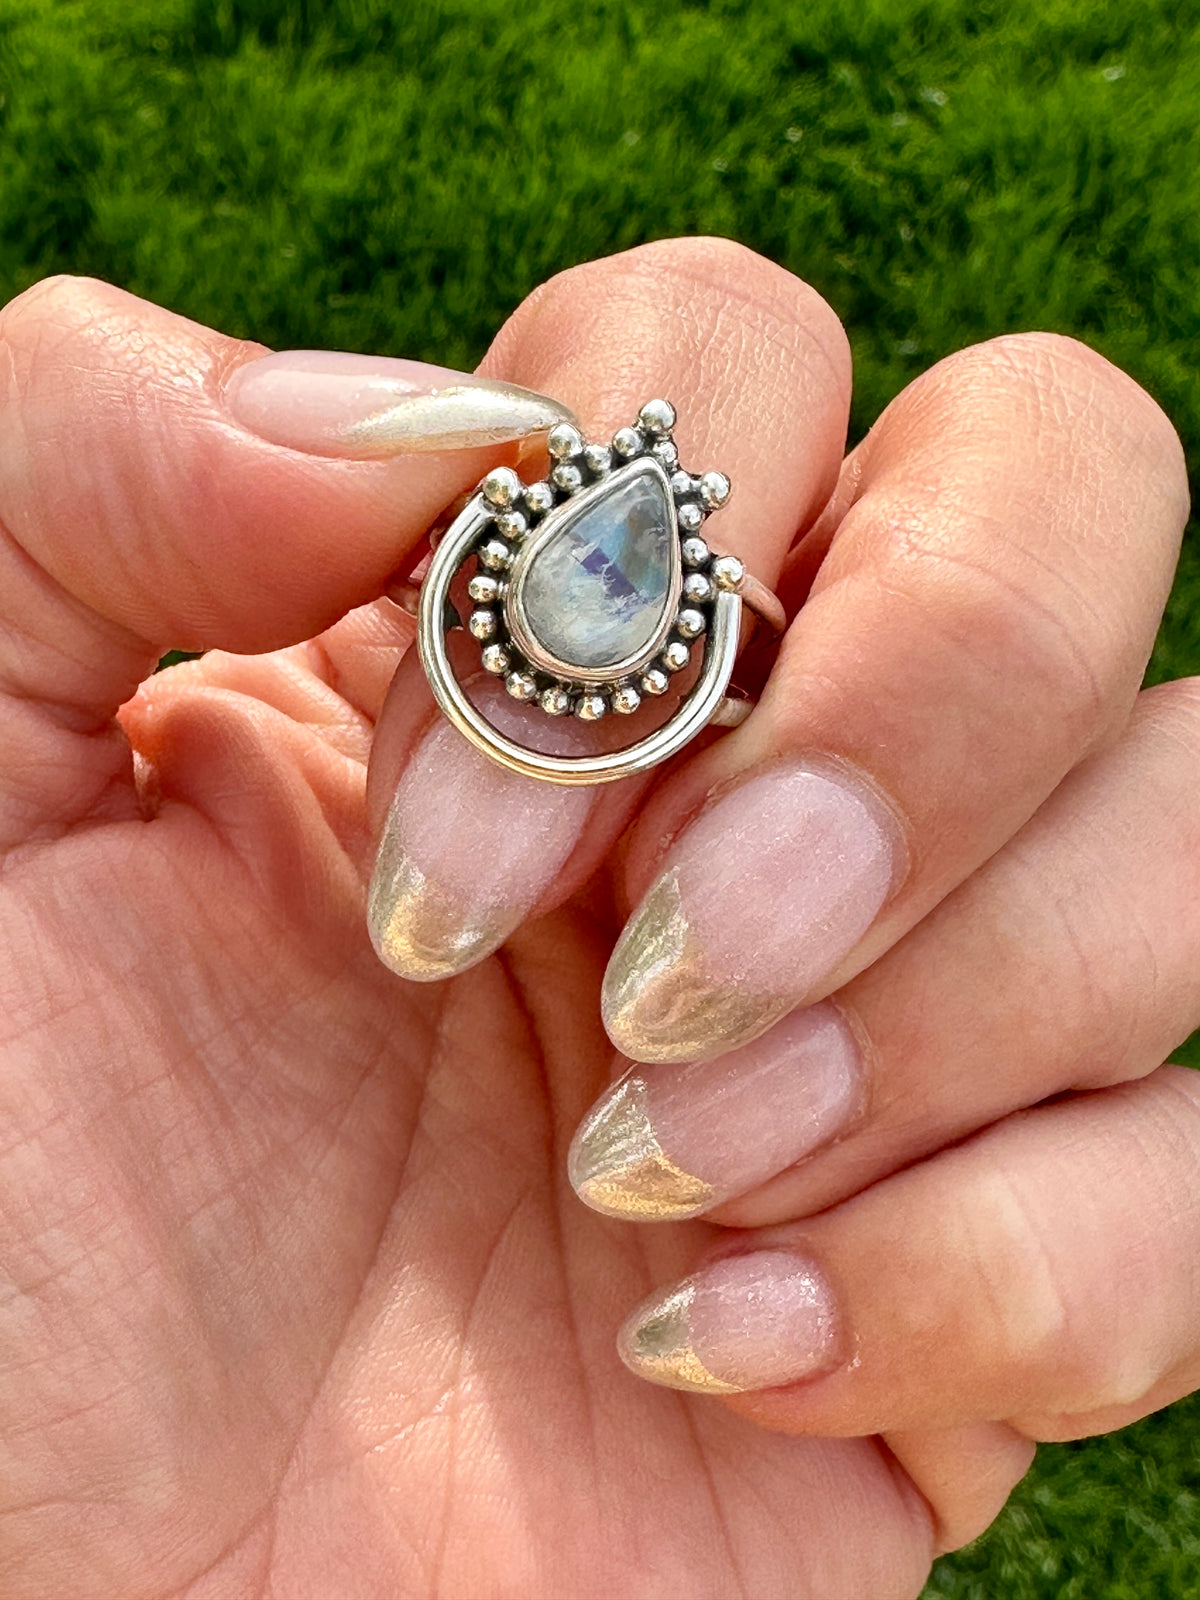 Enchanting Halo Moonstone Solid 925 Silver Ring - Boho-Inspired Beauty in Sterling Silver Setting